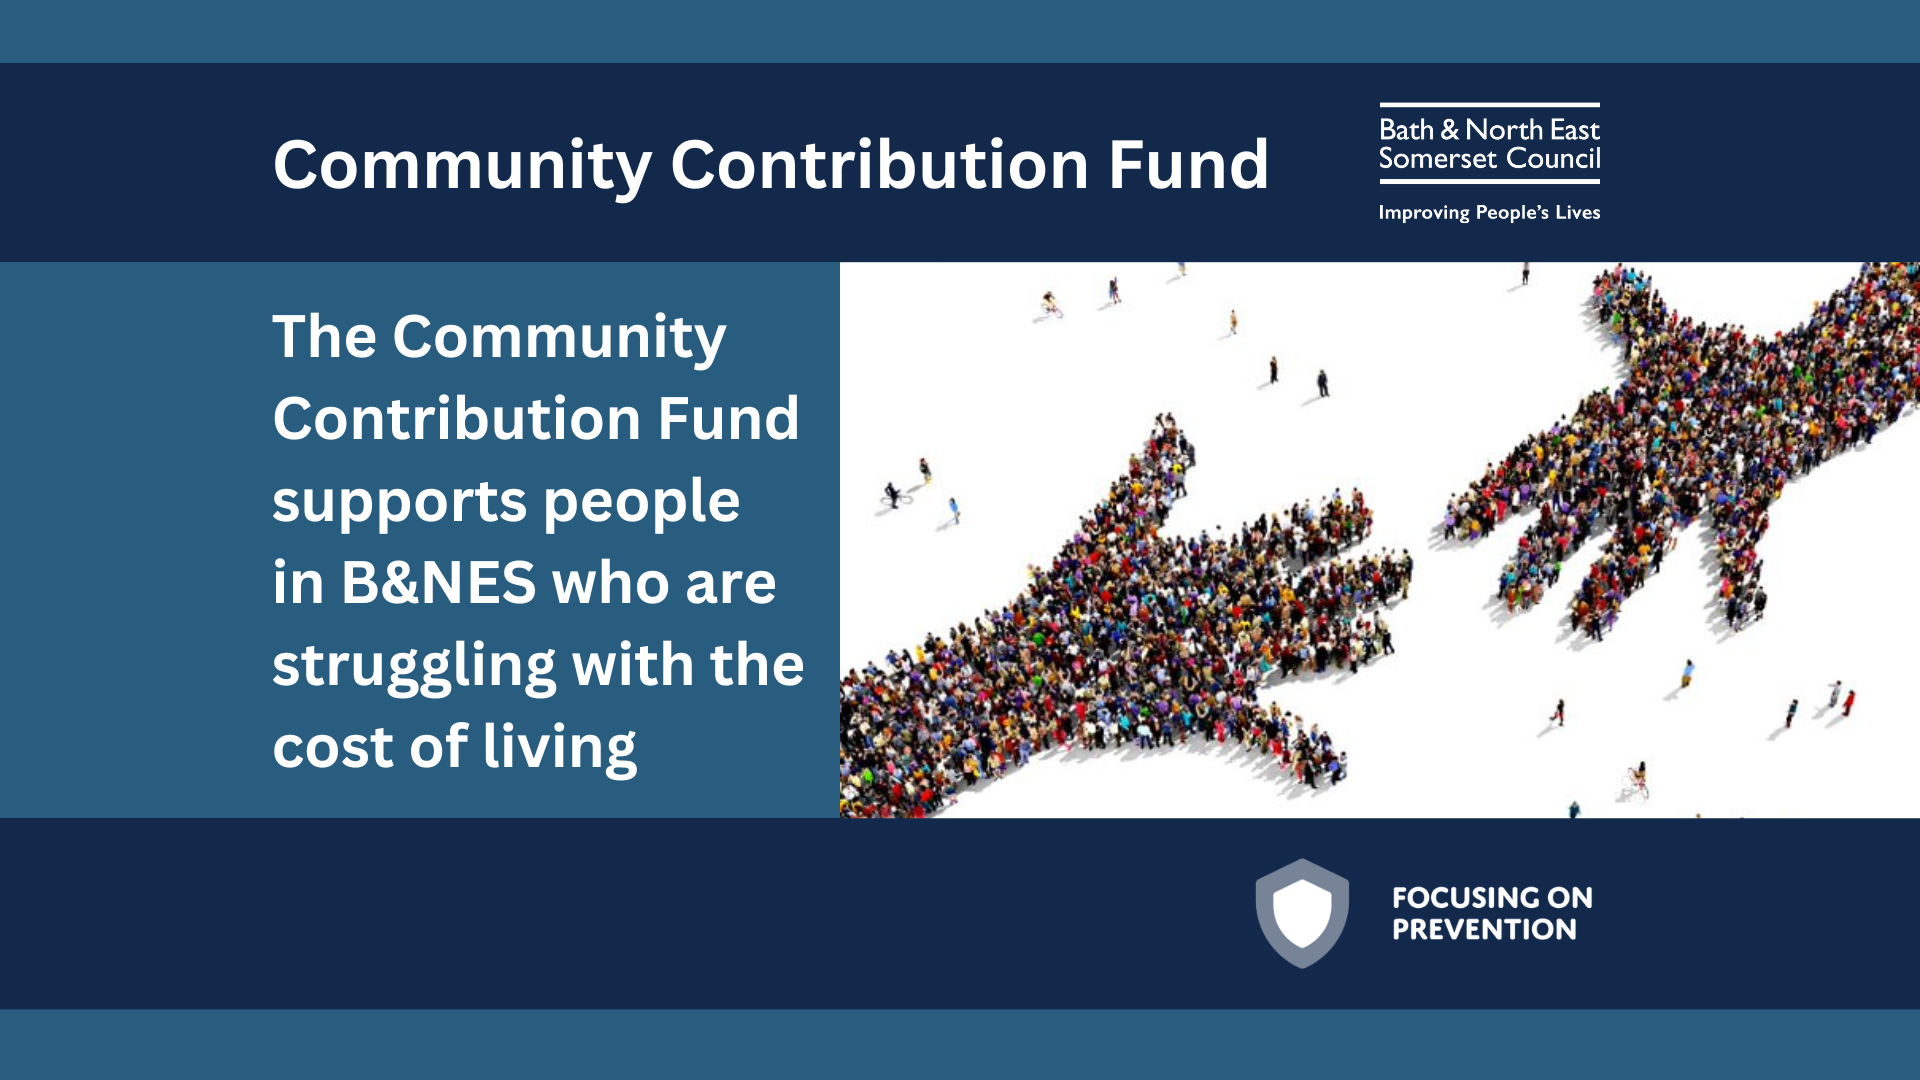 Community Contribution Fund to support local good causes 